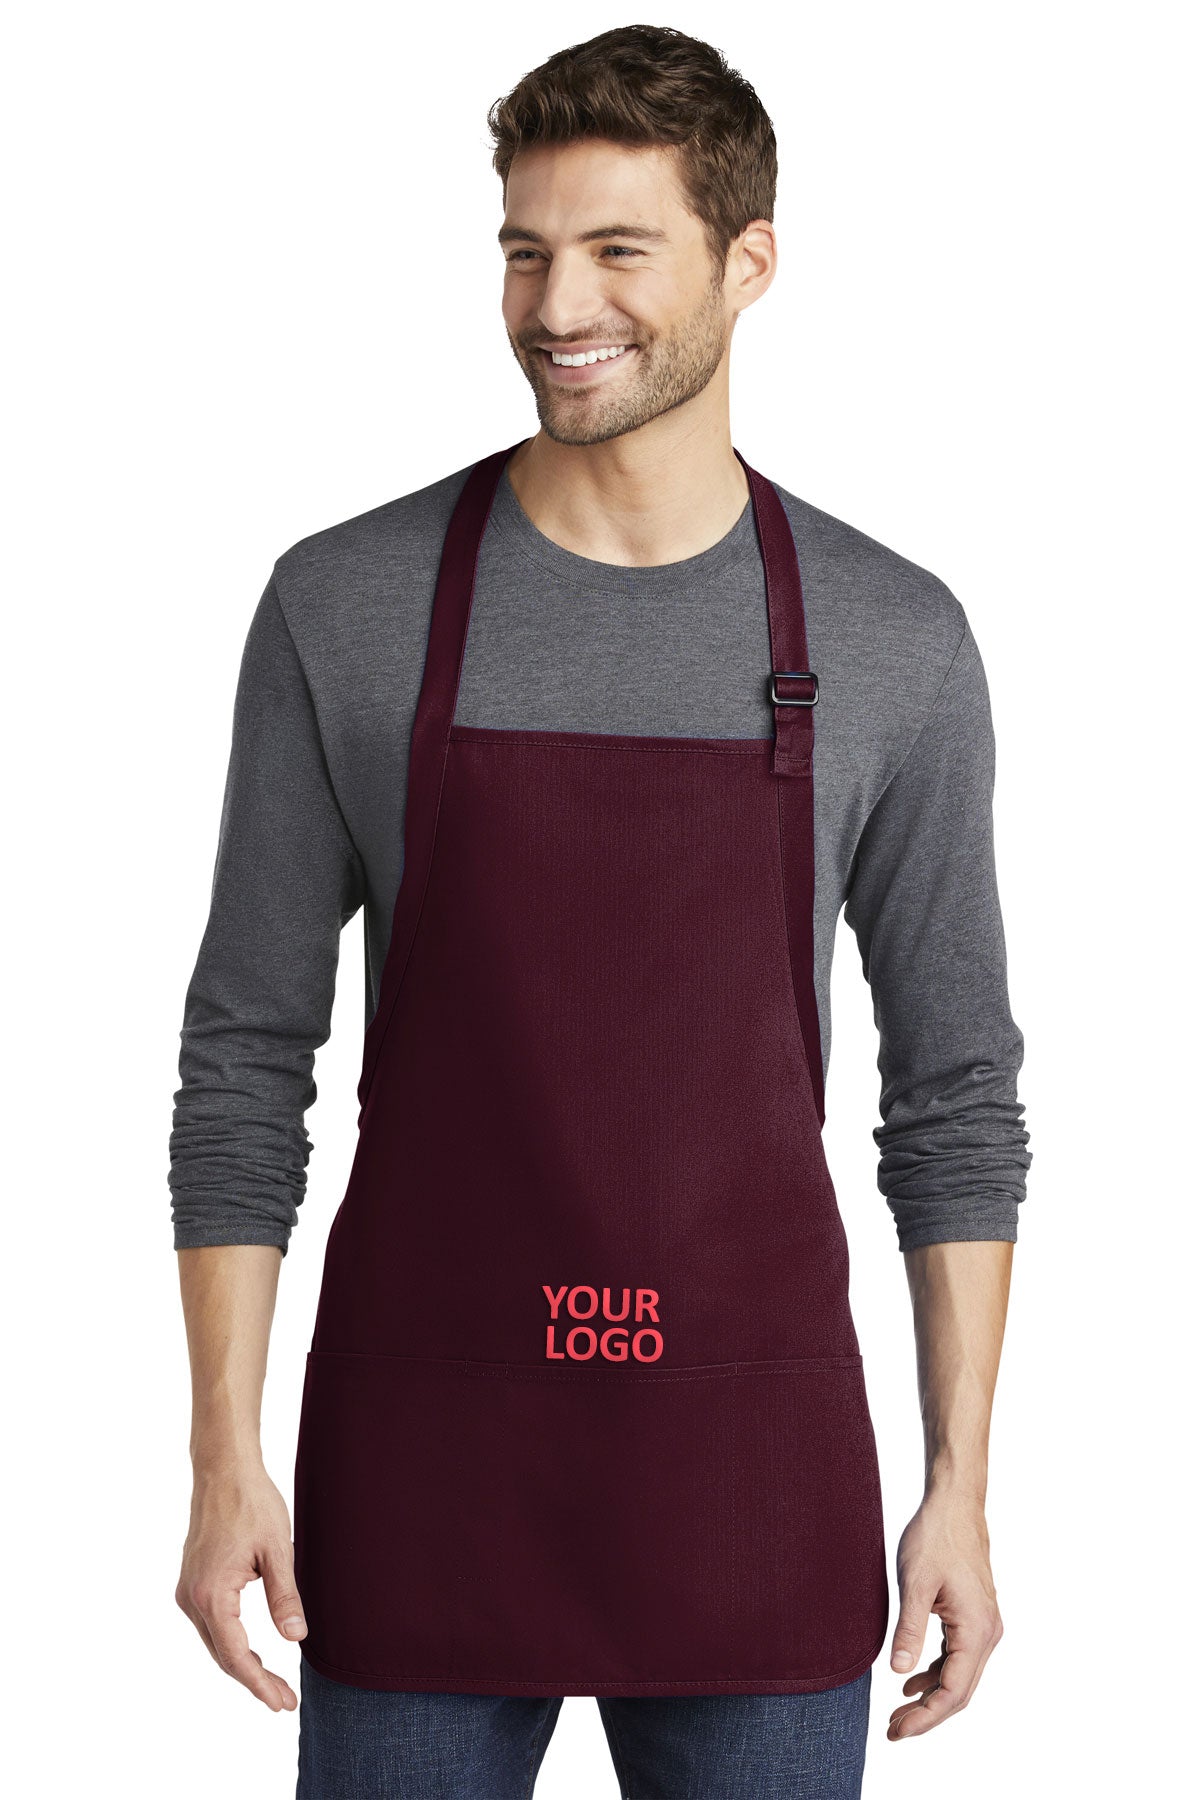 Port Authority Medium-Length Apron with Pouch Pockets A510 Maroon